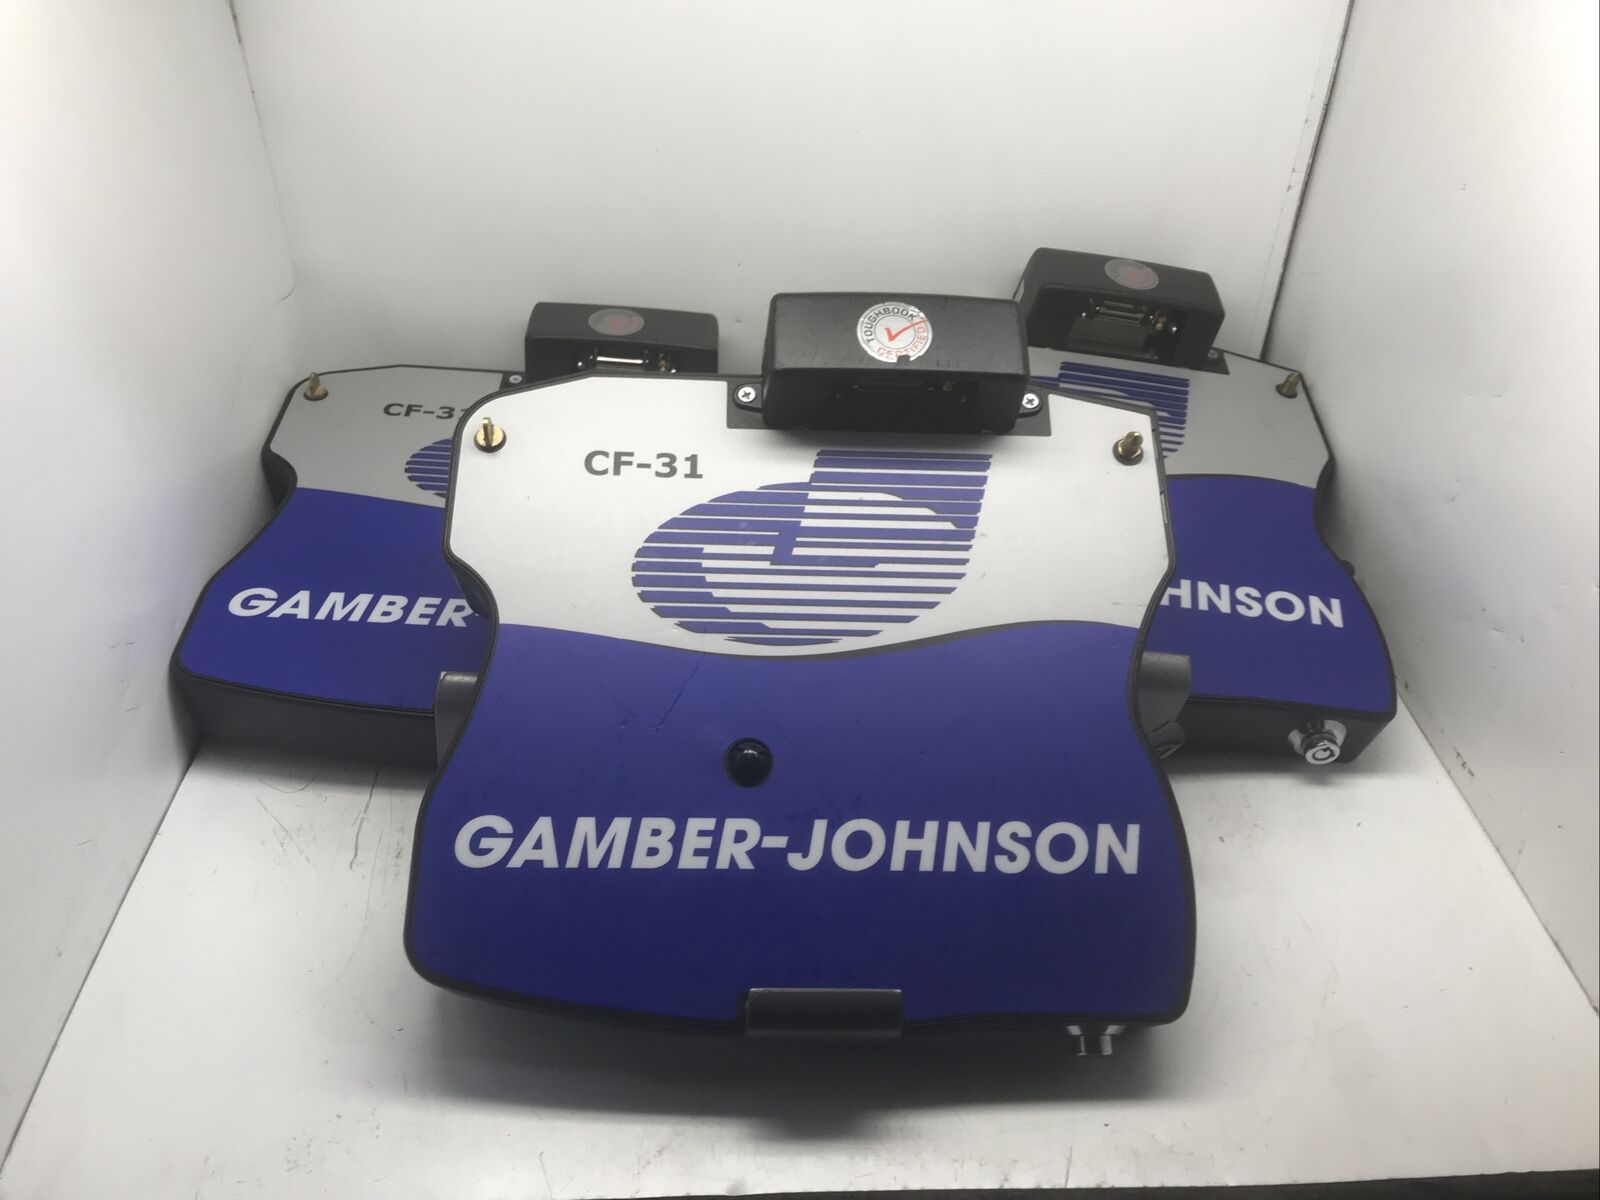 Lot of 3 Gamber-Johnson Toughbook CF-31 Docking Stations 7160-0318-02